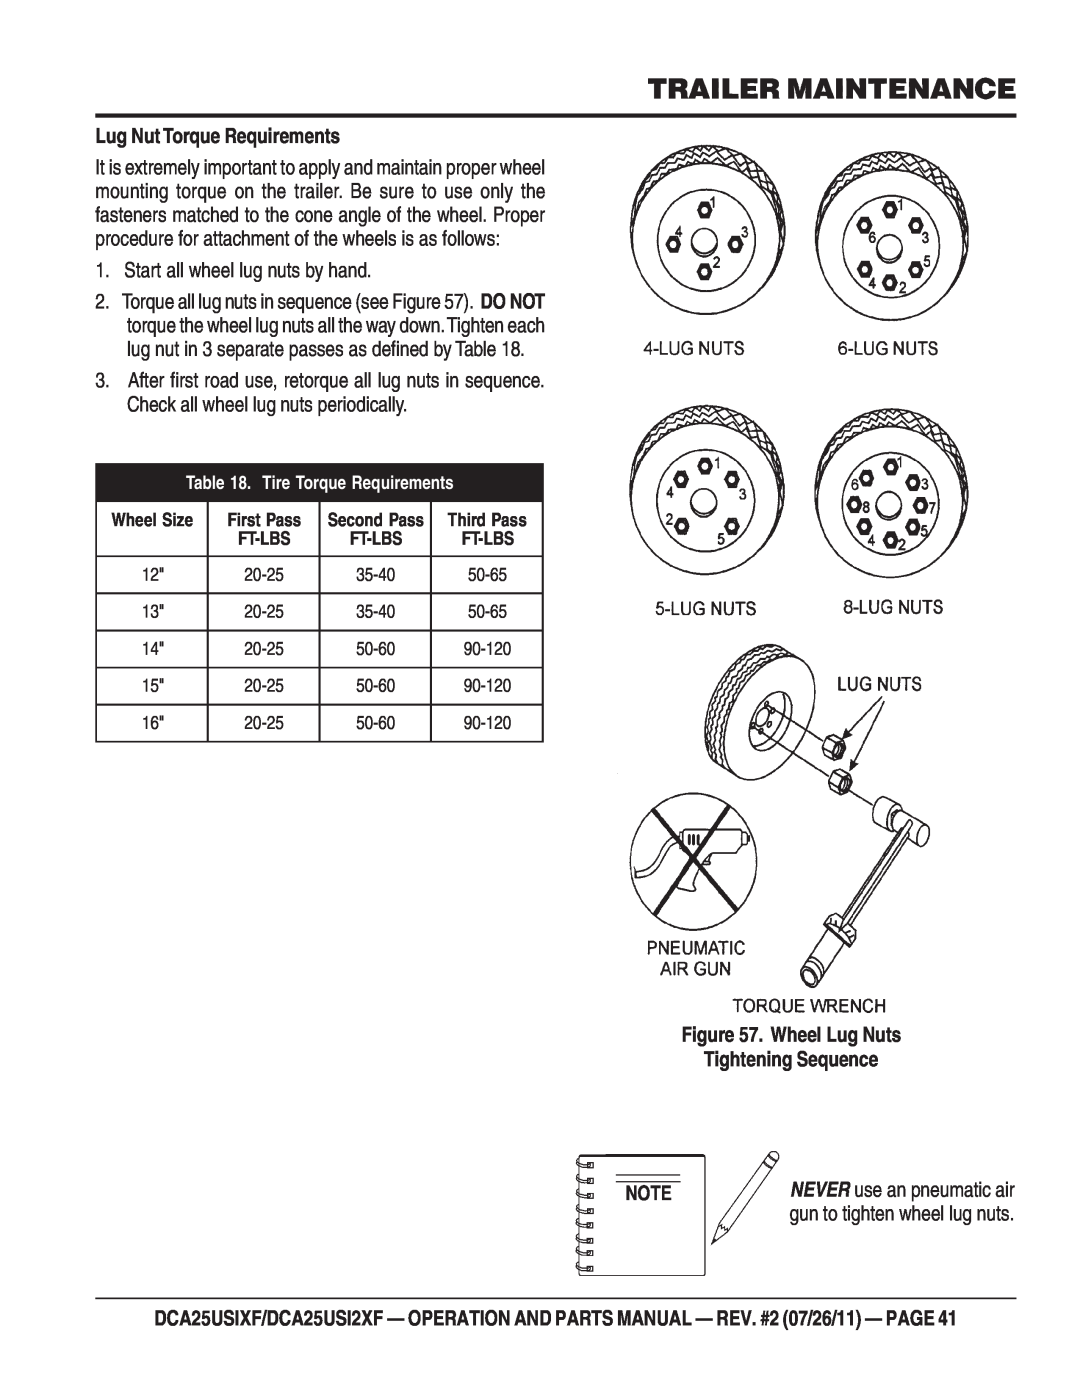 Multiquip DCA25USI2XF Lug Nut Torque Requirements, Wheel Lug Nuts Tightening Sequence, Trailer Maintenance, First Pass 